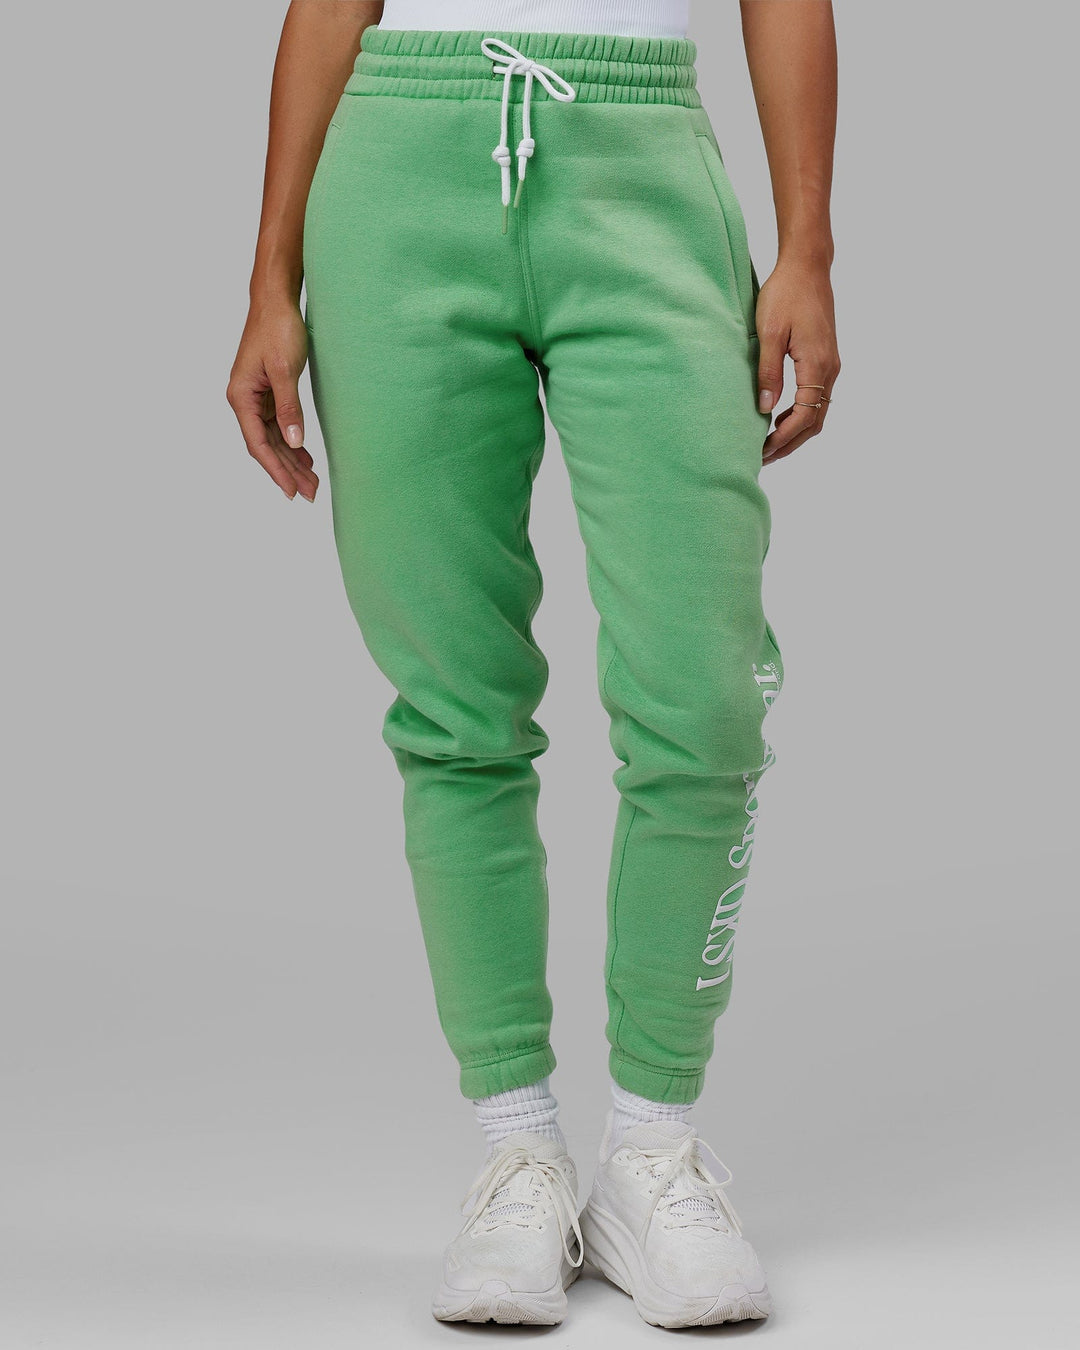 Woman wearing Unisex Motion Trackpant - Apple Mint